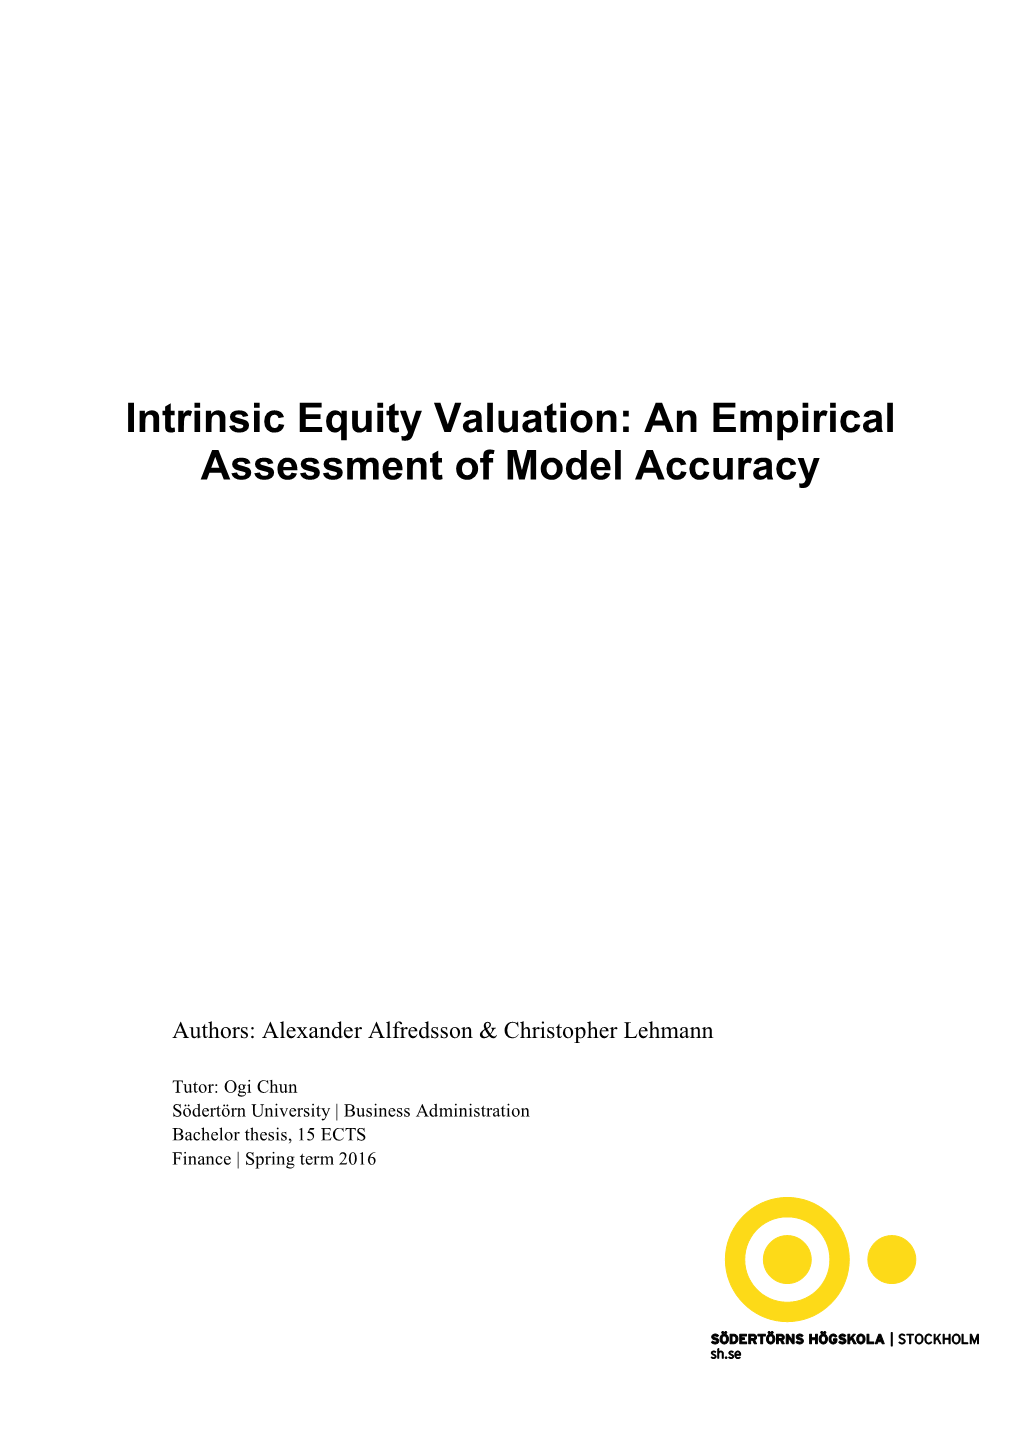 Intrinsic Equity Valuation: an Empirical Assessment of Model Accuracy